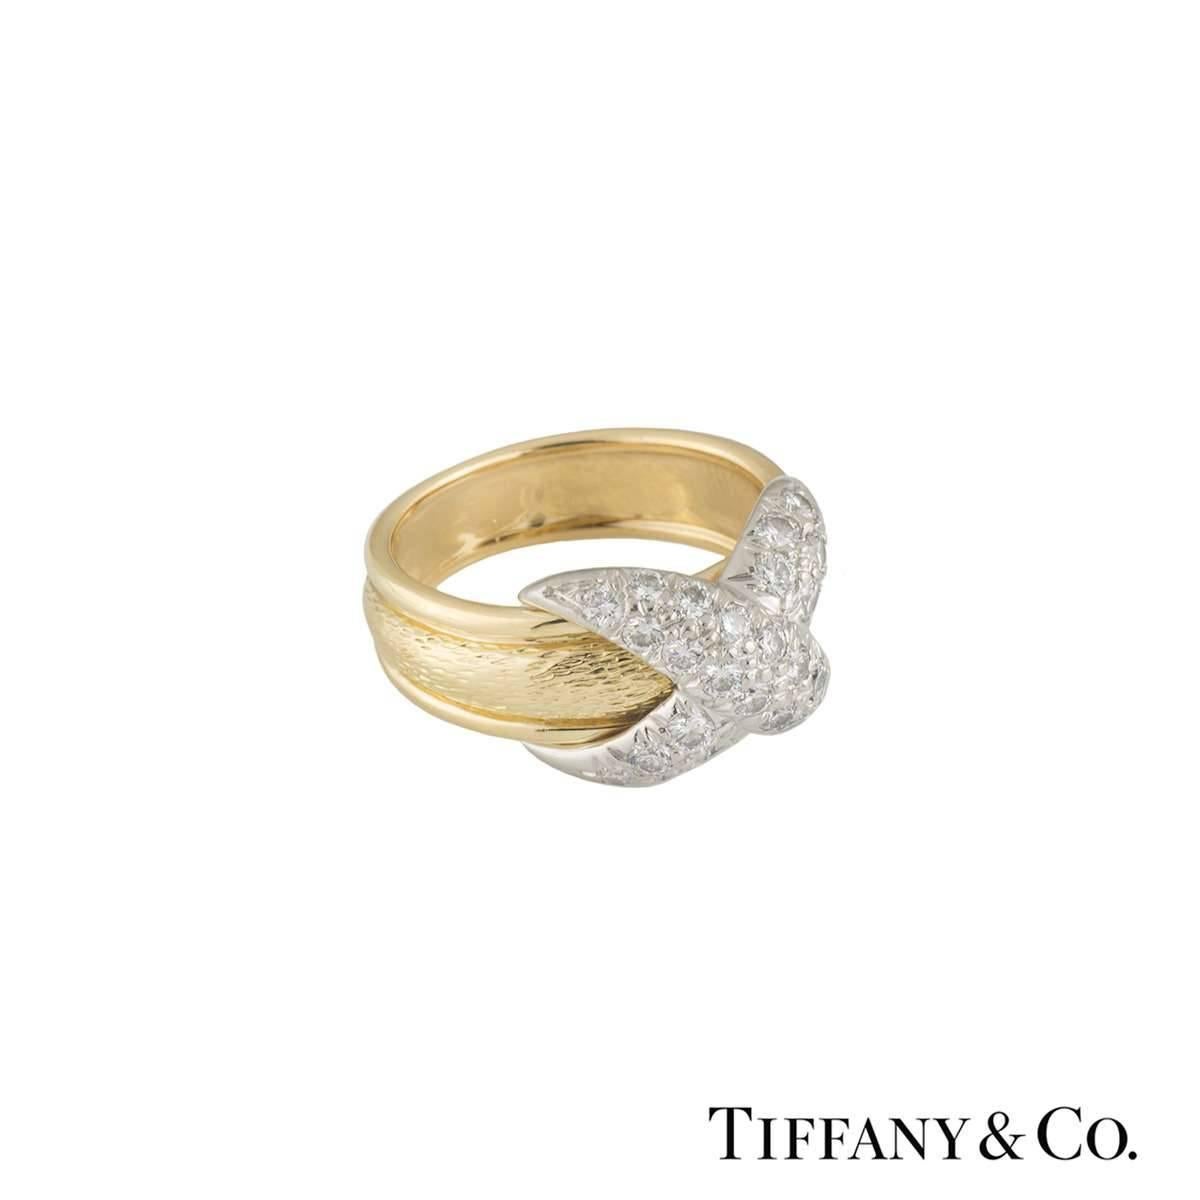 A lovely 18k yellow gold and platinum Tiffany & Co. diamond dress ring from the Schlumberger collection. The ring comprises of a 5mm patterned band with the classic Schlumberger cross motif placed in the centre encrusted with round brilliant cut